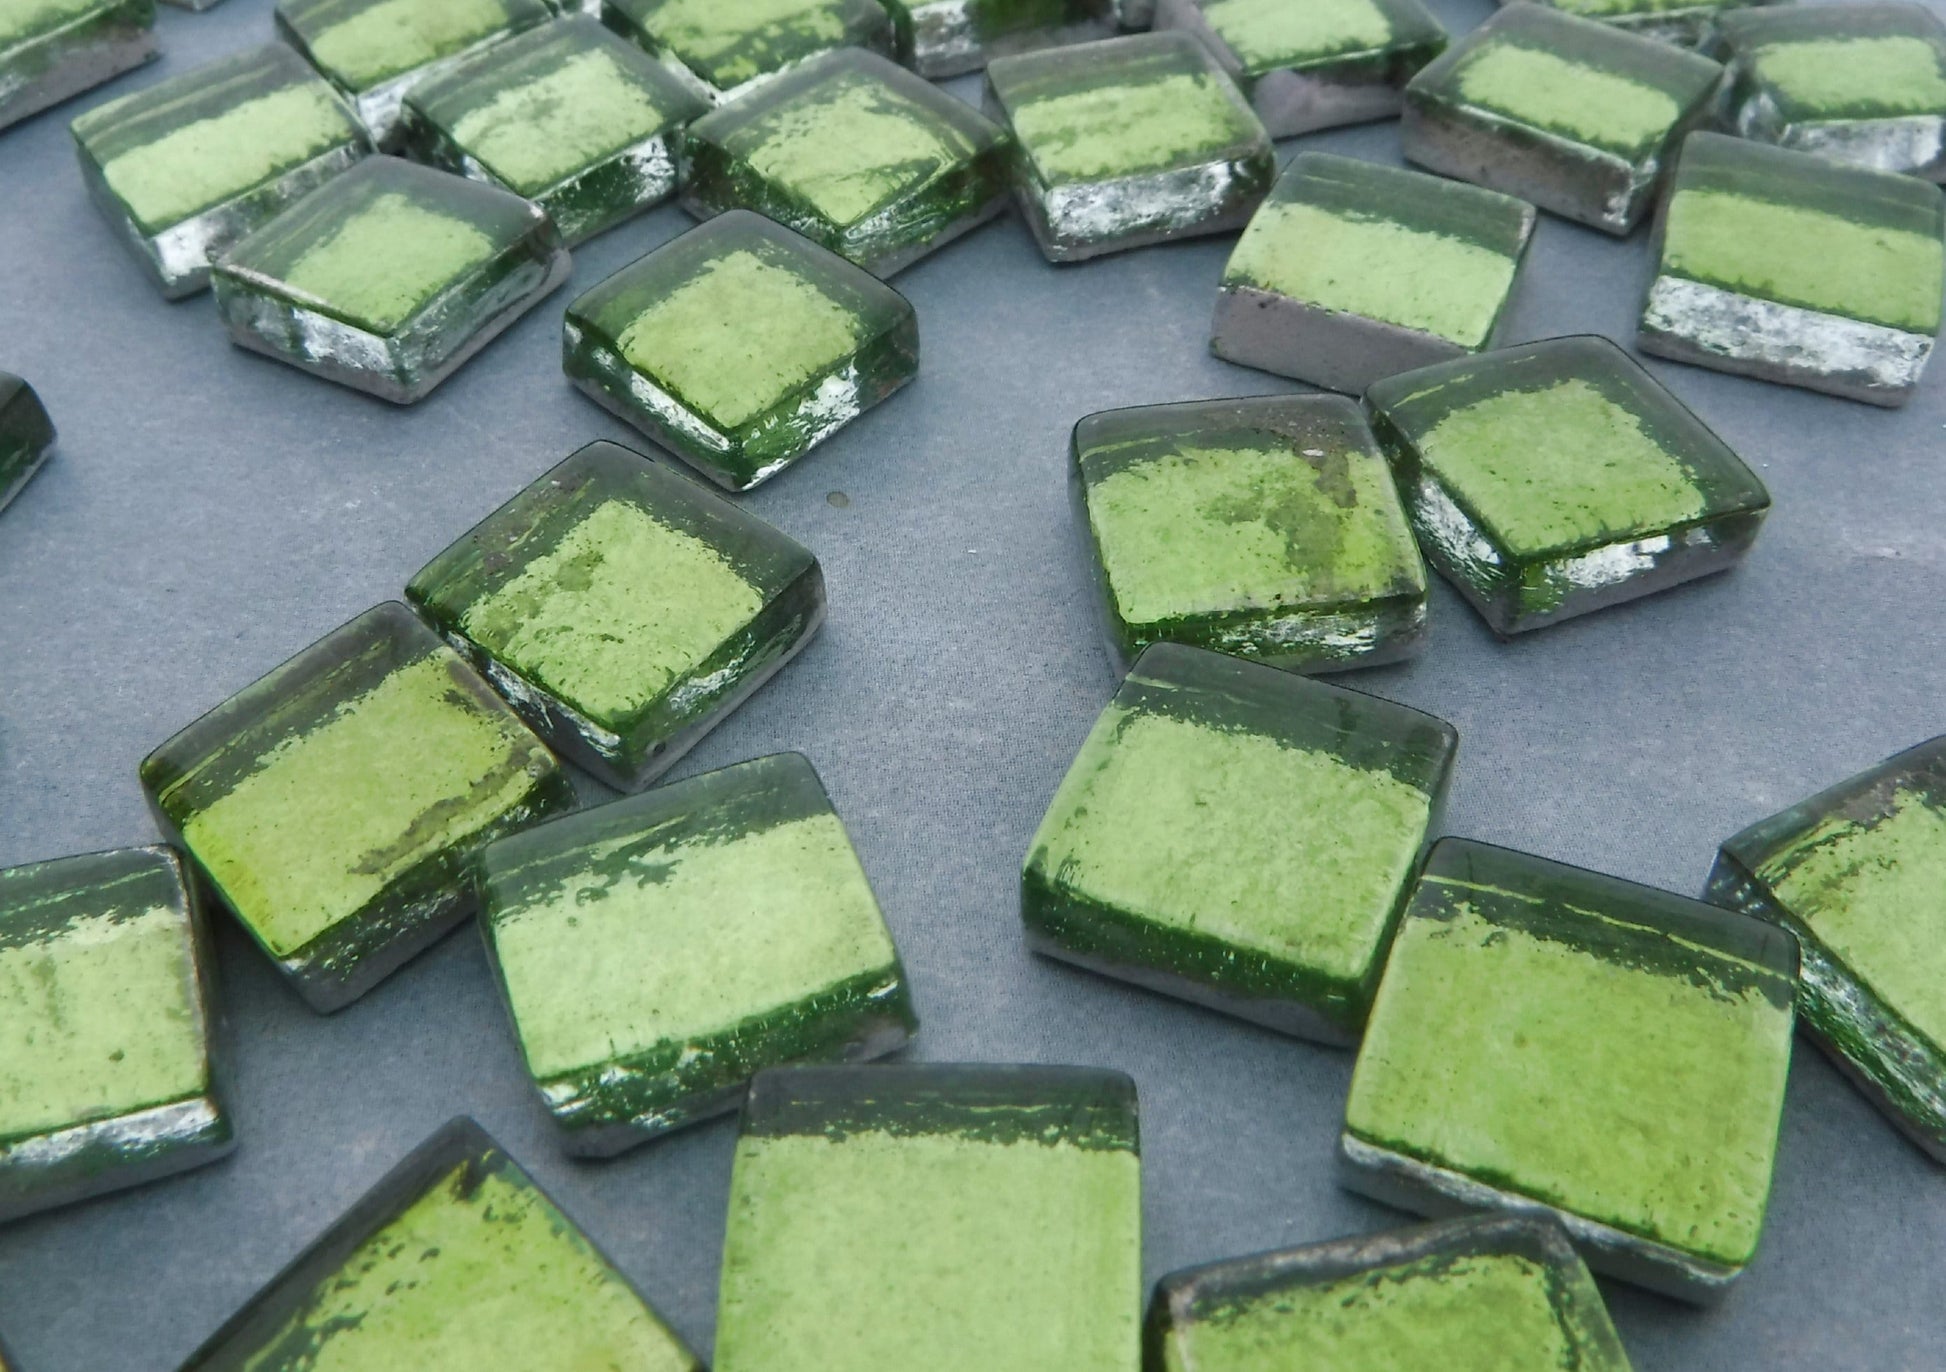 Green Foil Square Crystal Tiles - 12mm - 50g Metallic Glass Tiles in Chartreuse